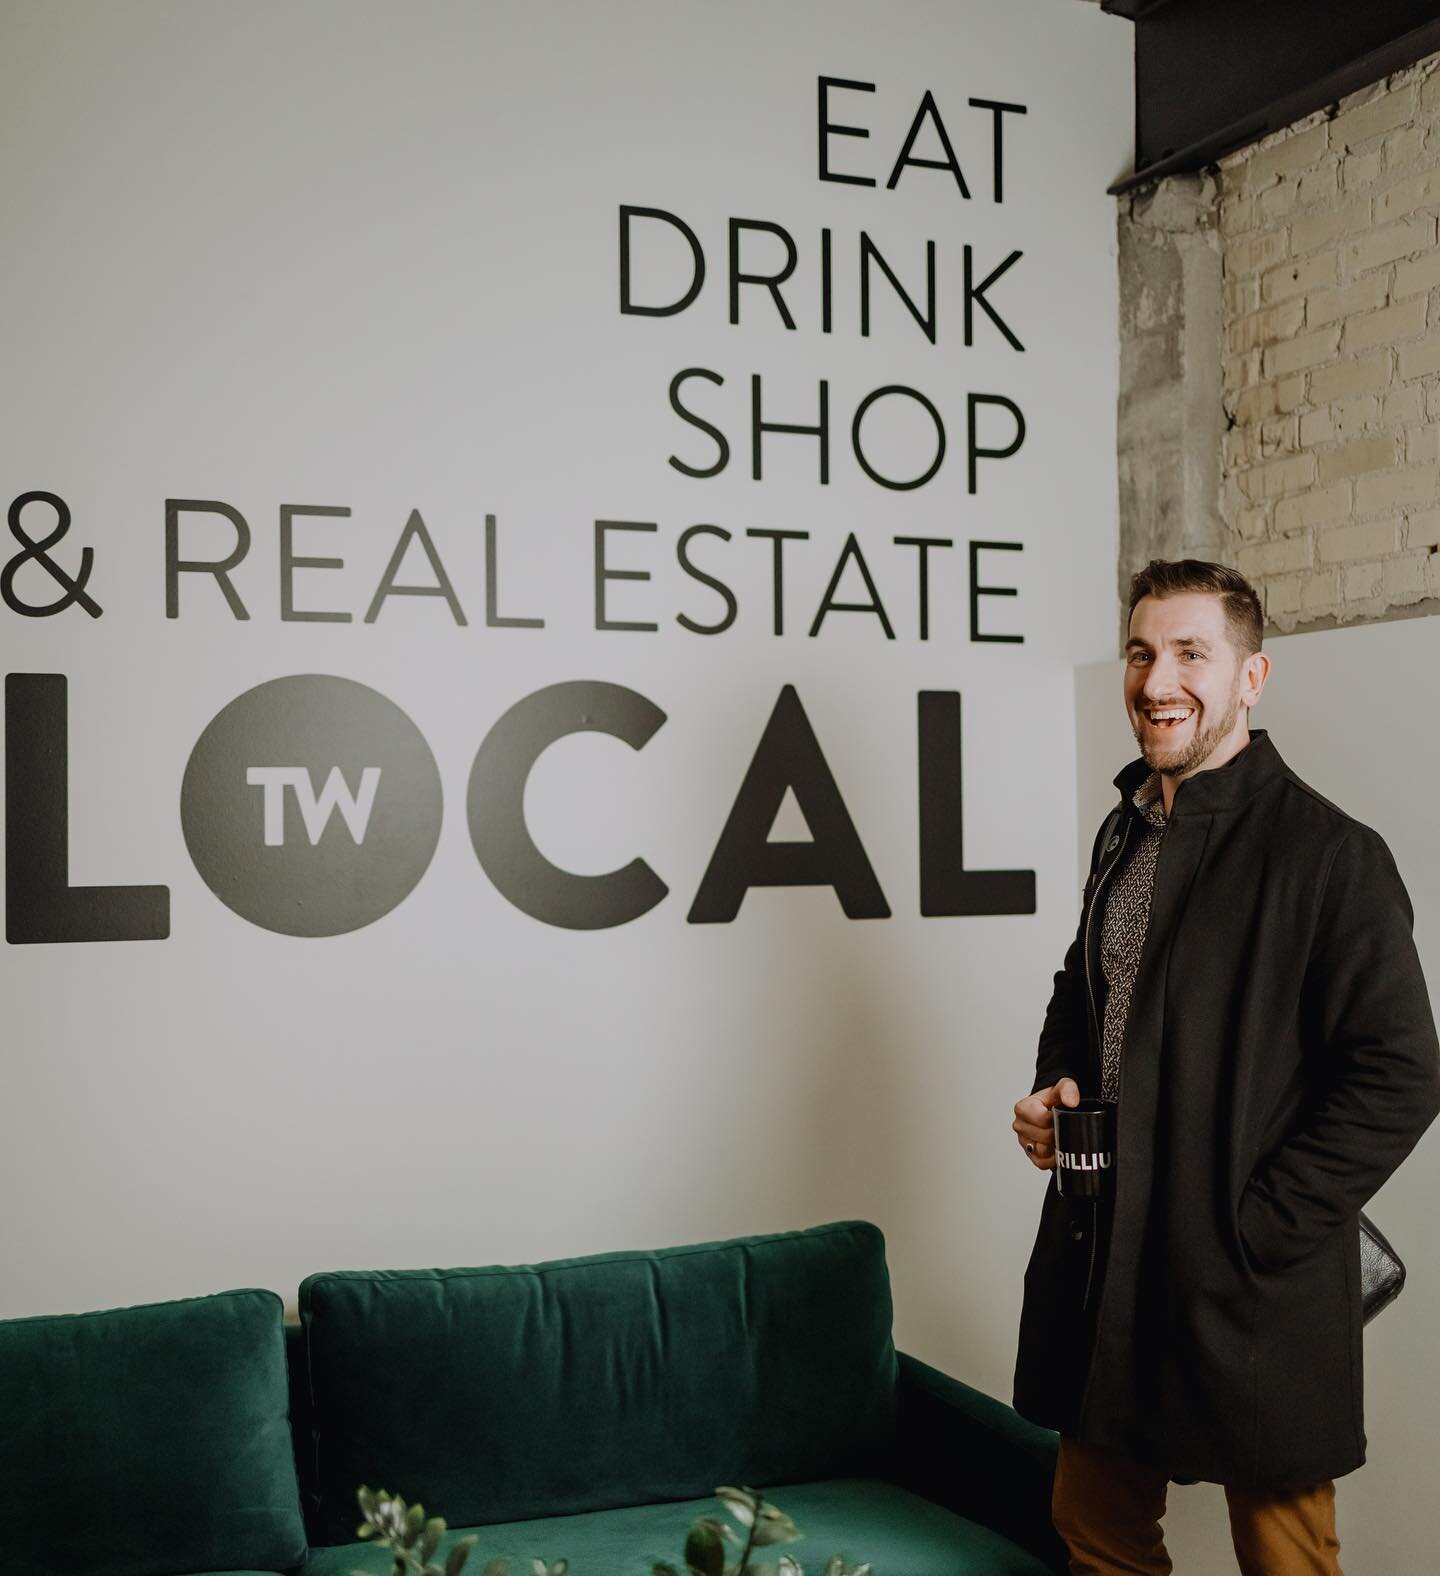 Alright KW - today&rsquo;s message is a simple one. Businesses have been hit HARD during the pandemic &mdash; as restrictions ease &mdash; it&rsquo;s time to get out and SUPPORT LOCAL. ⁣
⁣
There is a common misconception that business owners are weal